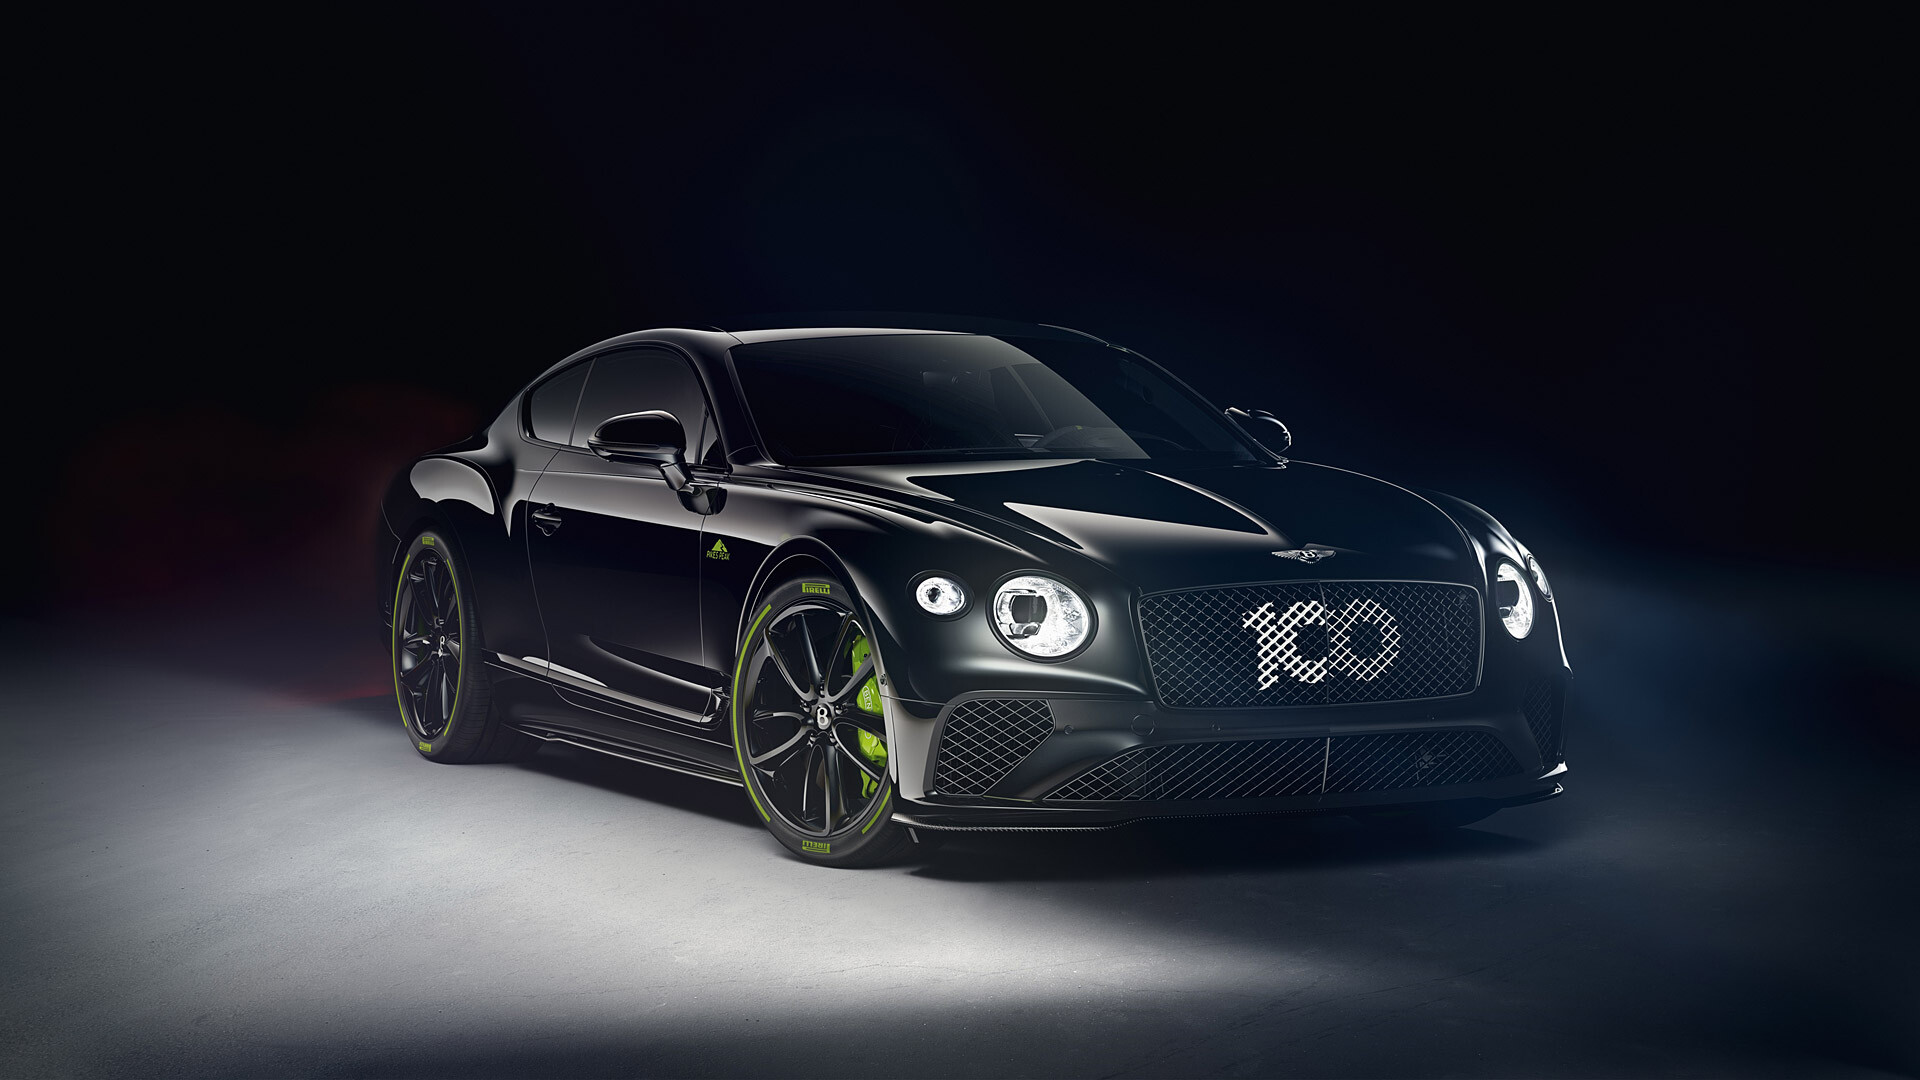 Continental GT3 2020, High-definition wallpapers, Ultimate racing machine, Track-ready, 1920x1080 Full HD Desktop